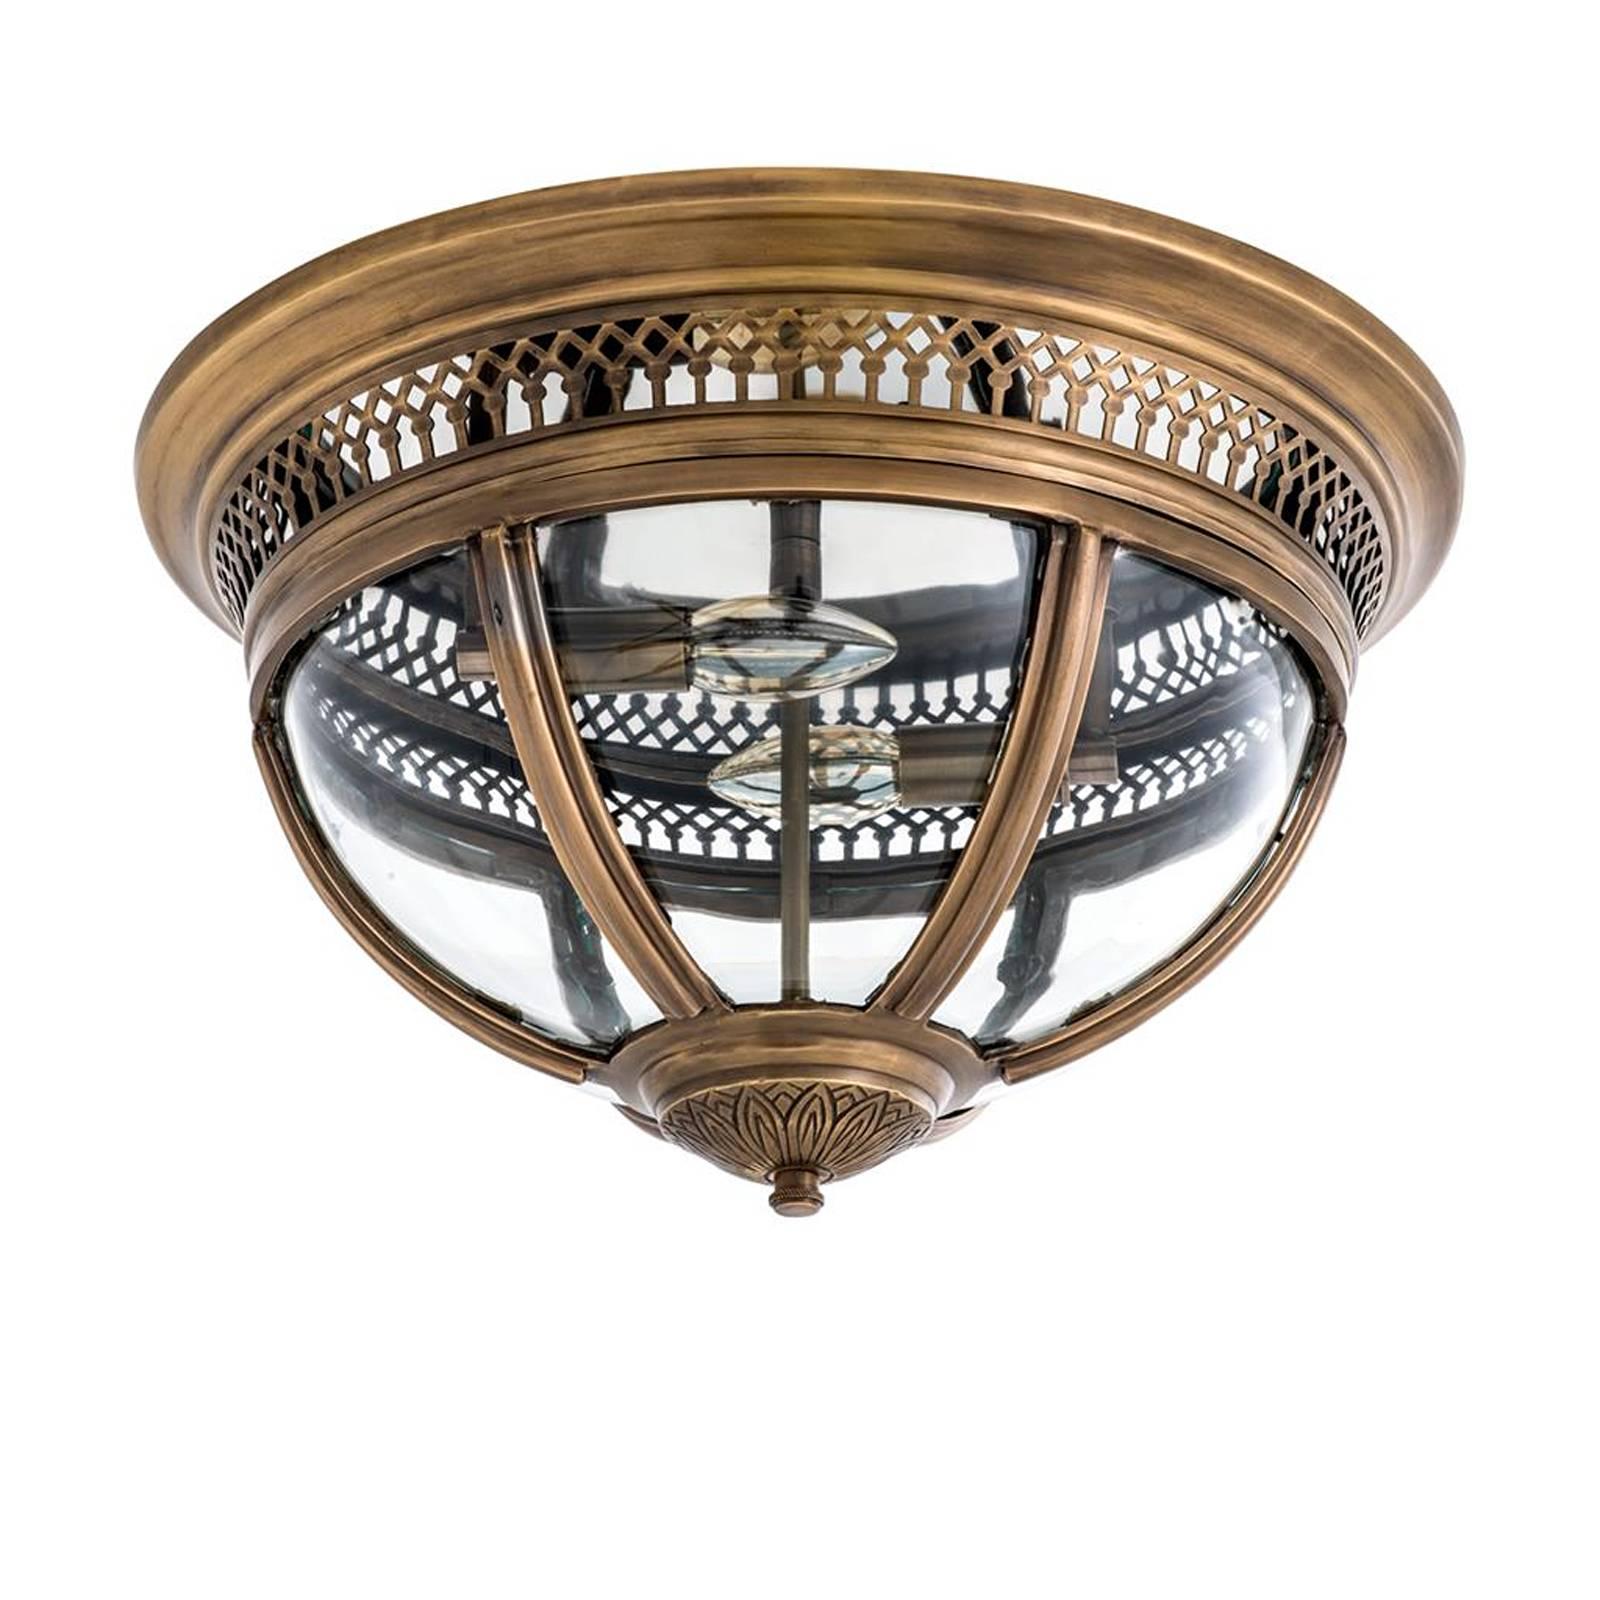 Suspension castle planet with antique brass finish
structure and clear glass. Two bulbs lamp holder type
E14, max: 40 watt. Bulbs not included. Also available
with nickel or bronze finish structure.
